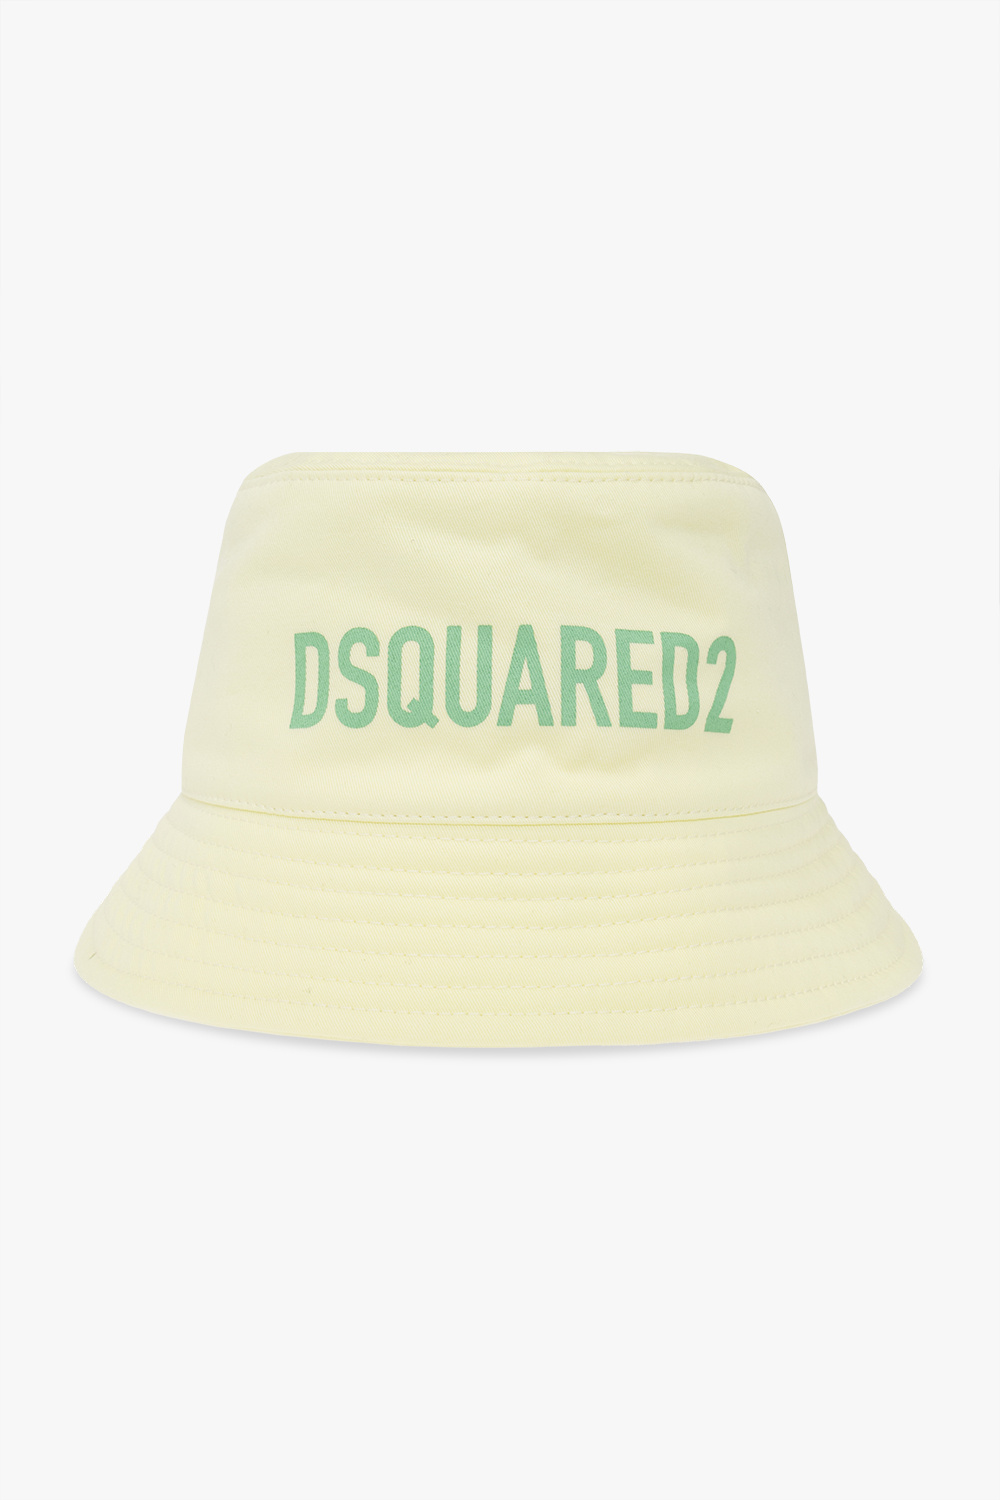 Green Bucket hat with logo Dsquared2 - Vitkac Canada